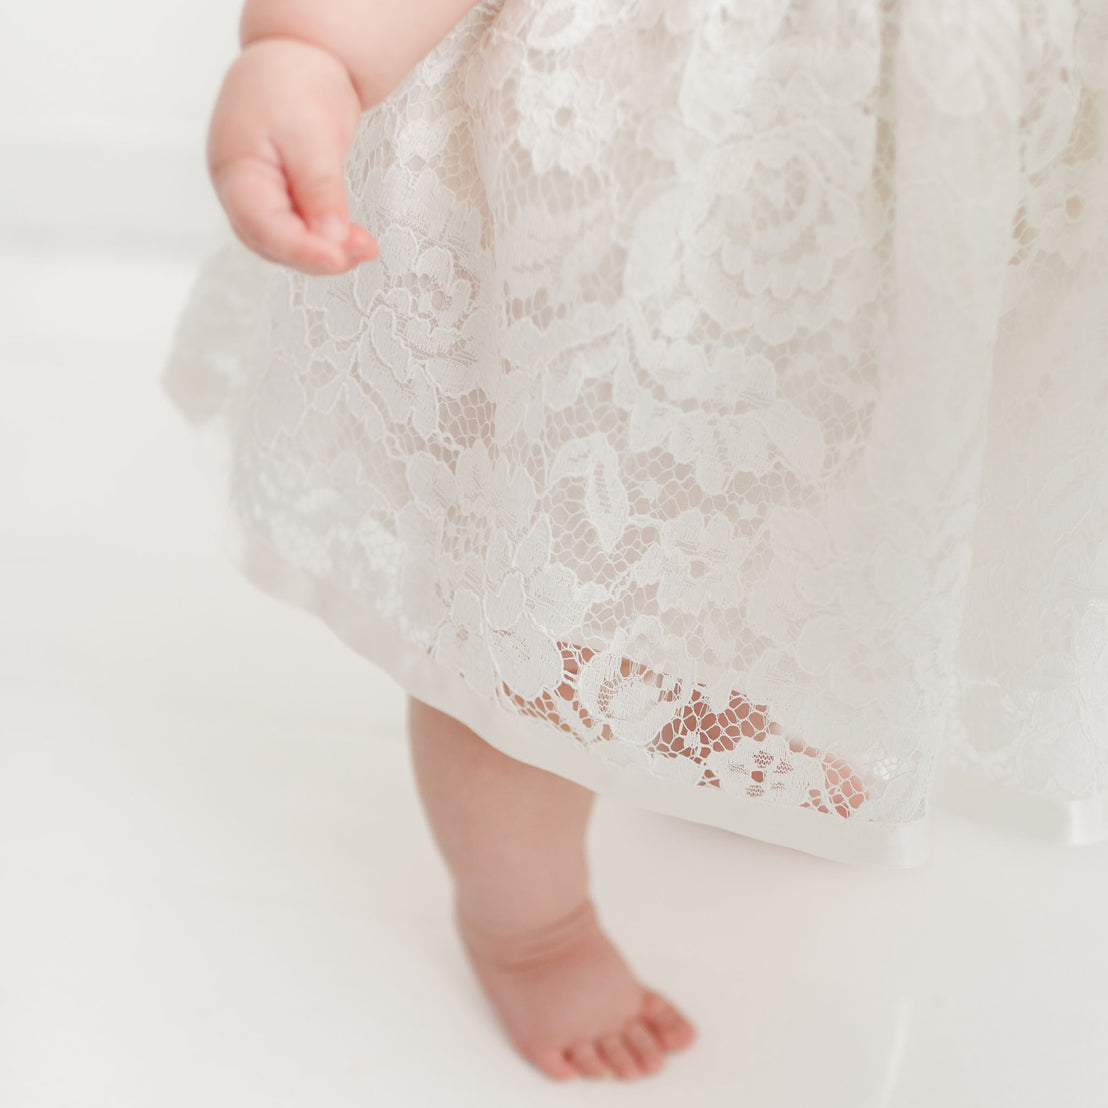 Close-up of a baby's lower legs and feet, one visible in focus. The baby is wearing the Rose Romper Dress. The background is white.